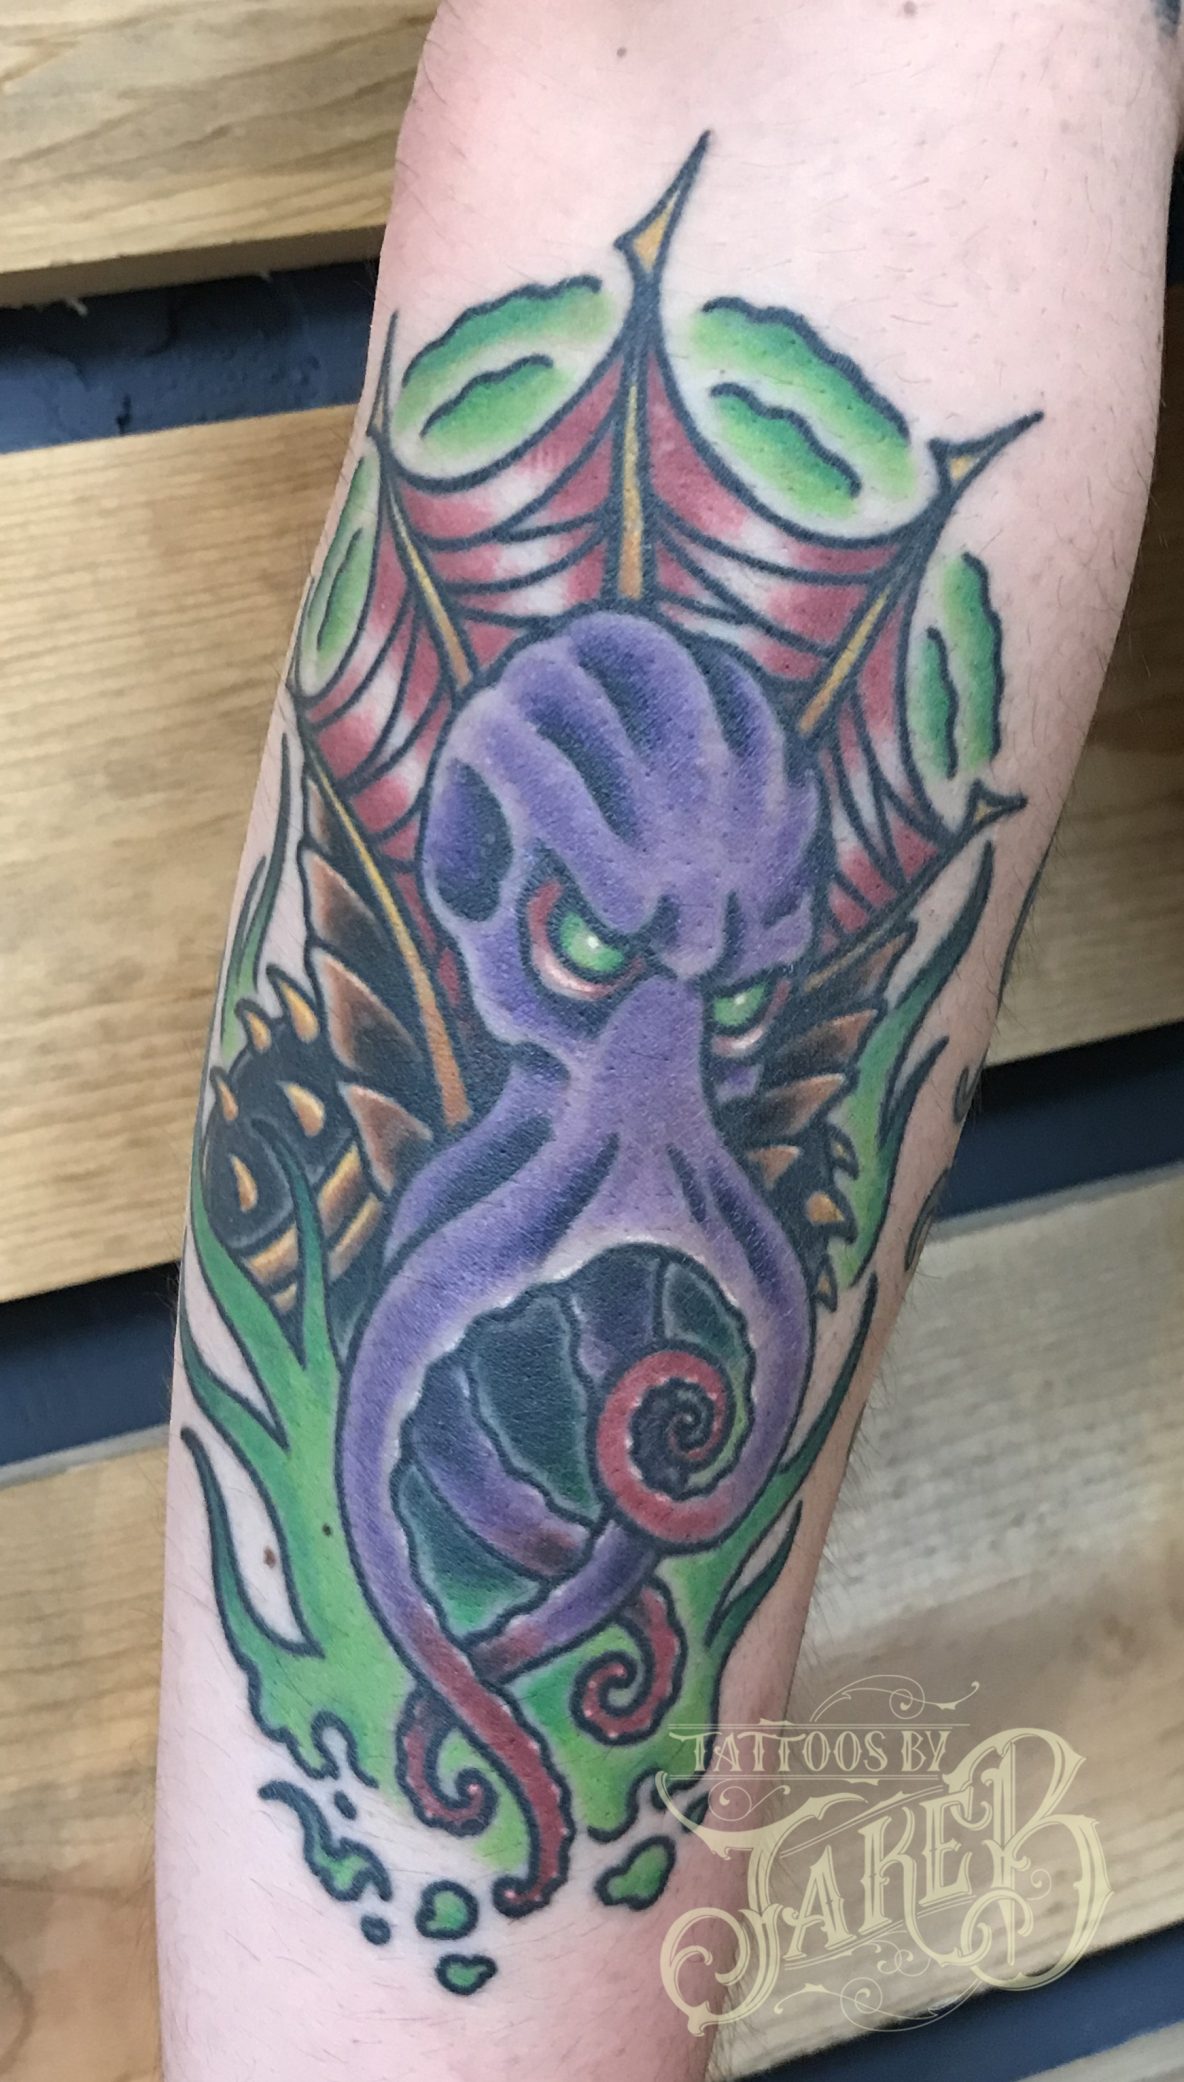 dungeons and dragons mind flayer tattoo by Jake B